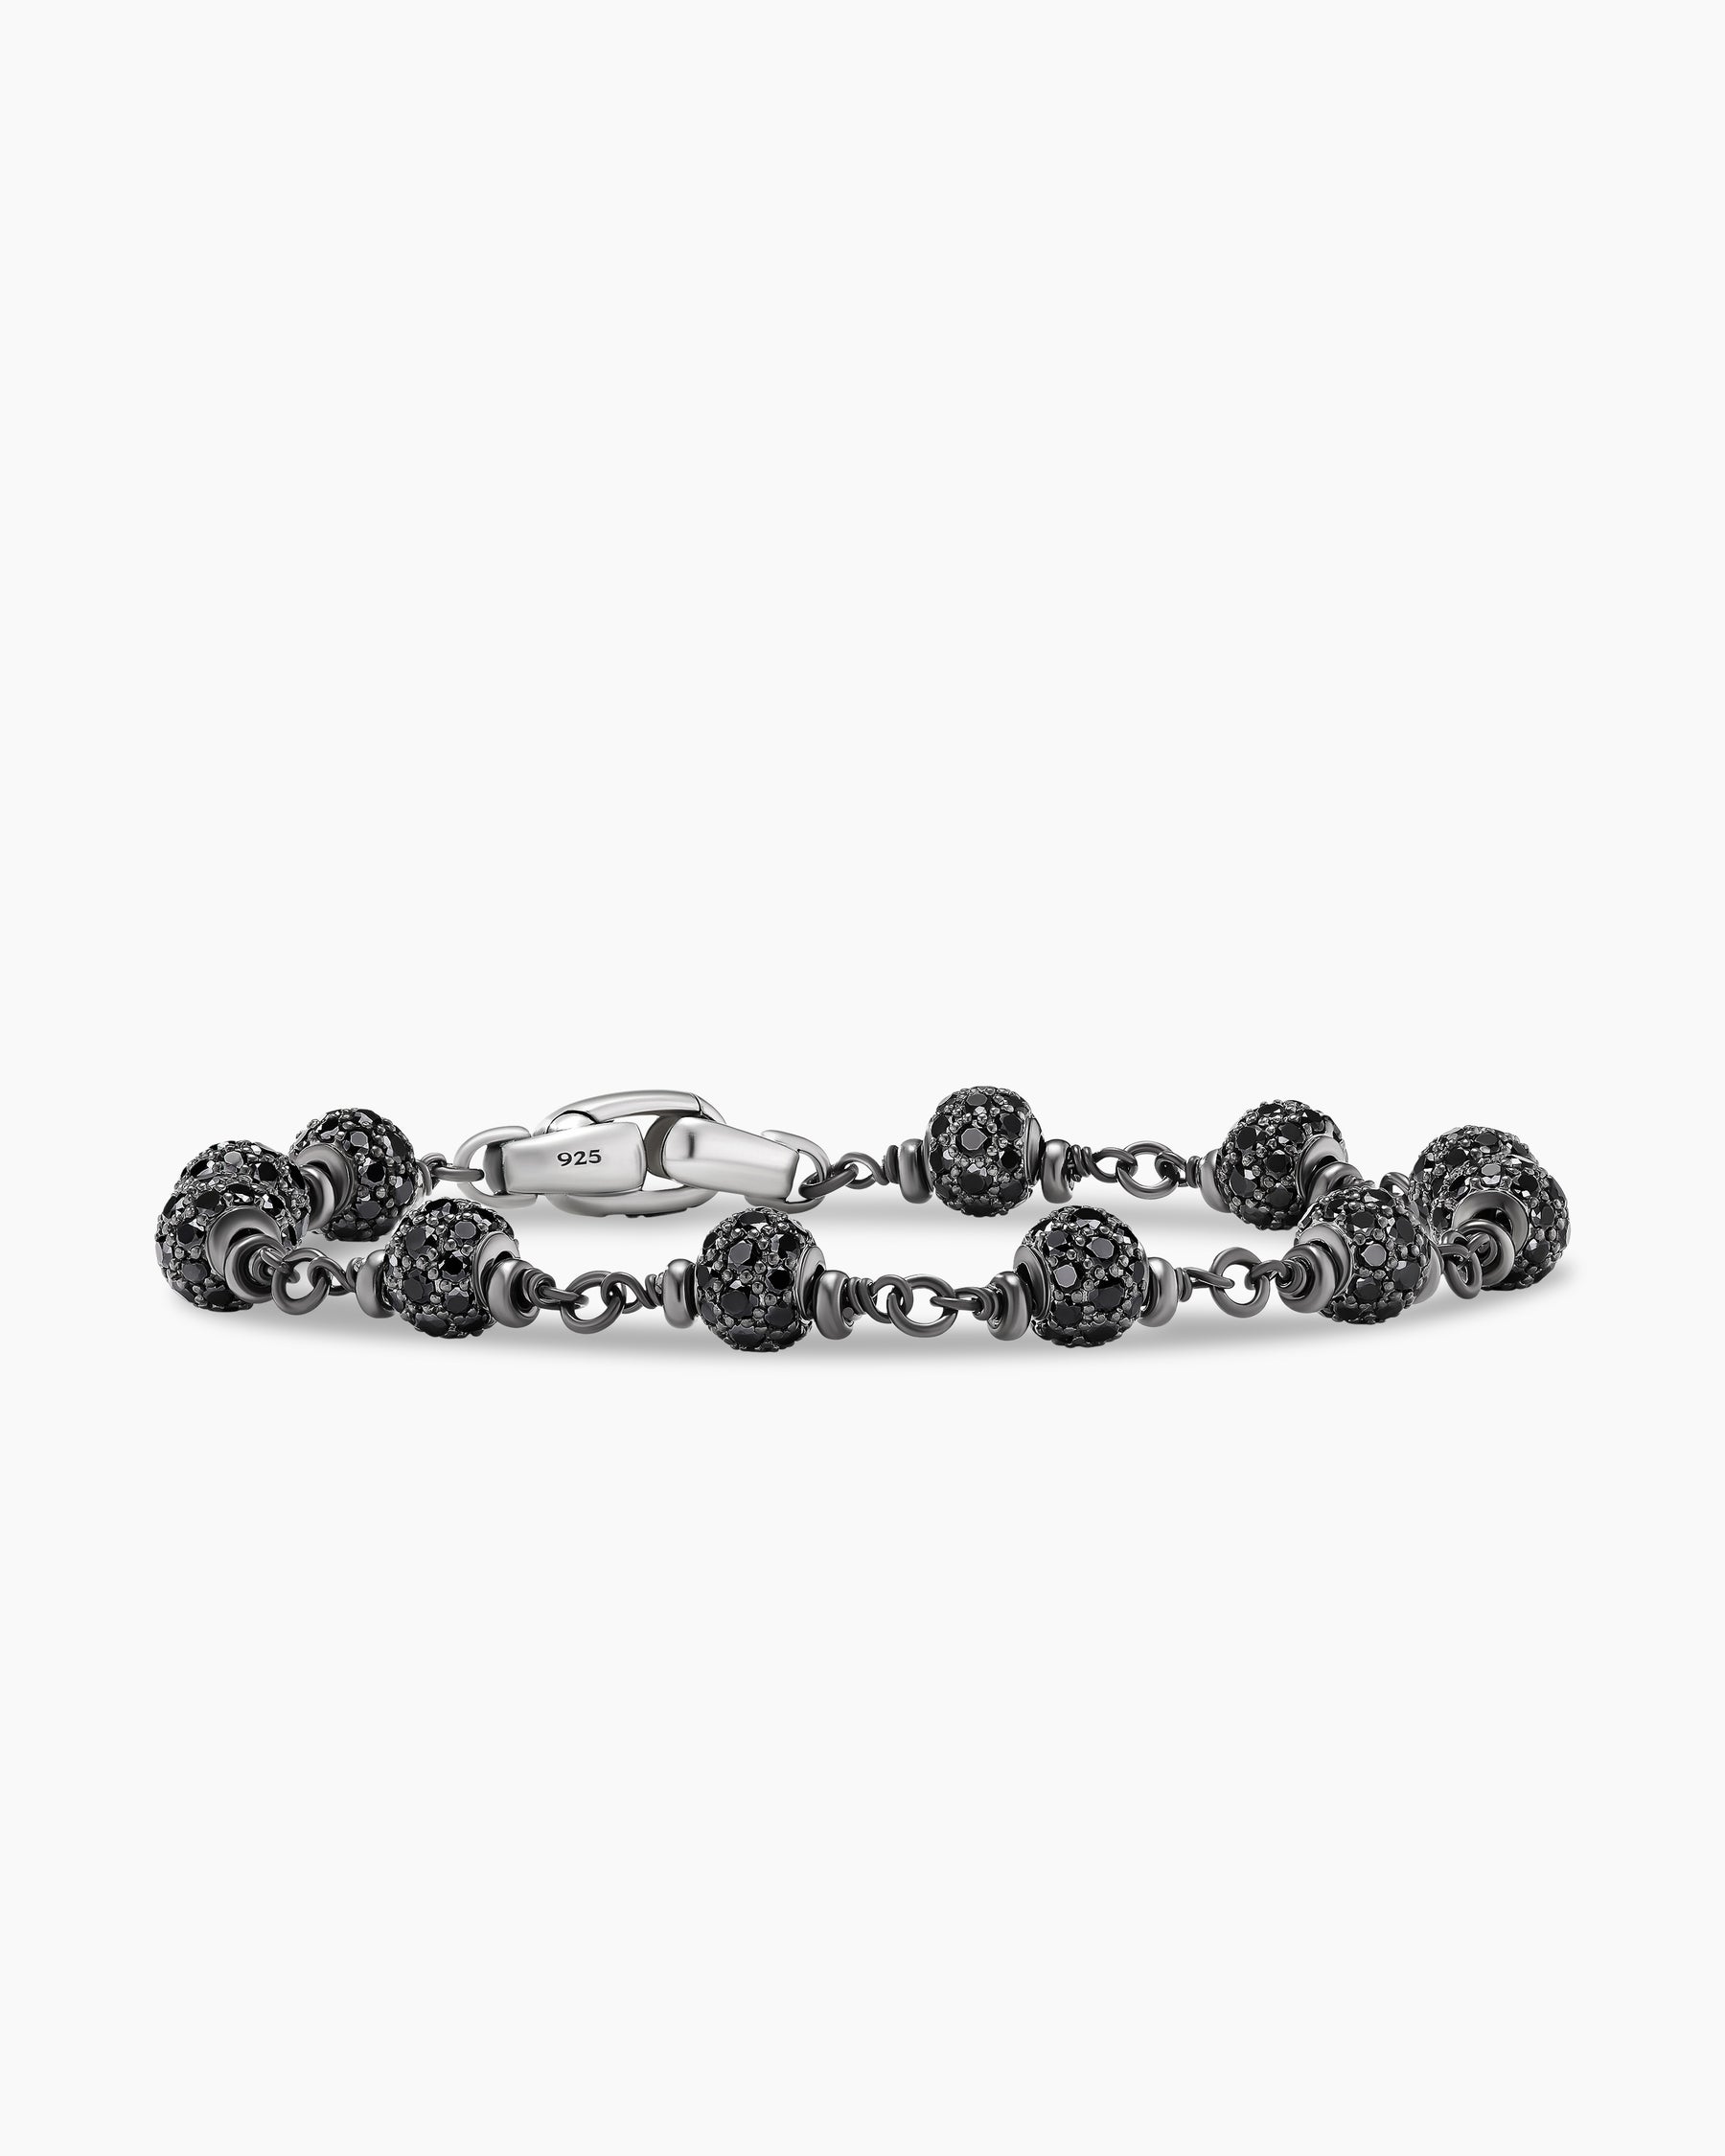 Spiritual Beads Bracelet in Sterling Silver with Pavé Station, 8mm